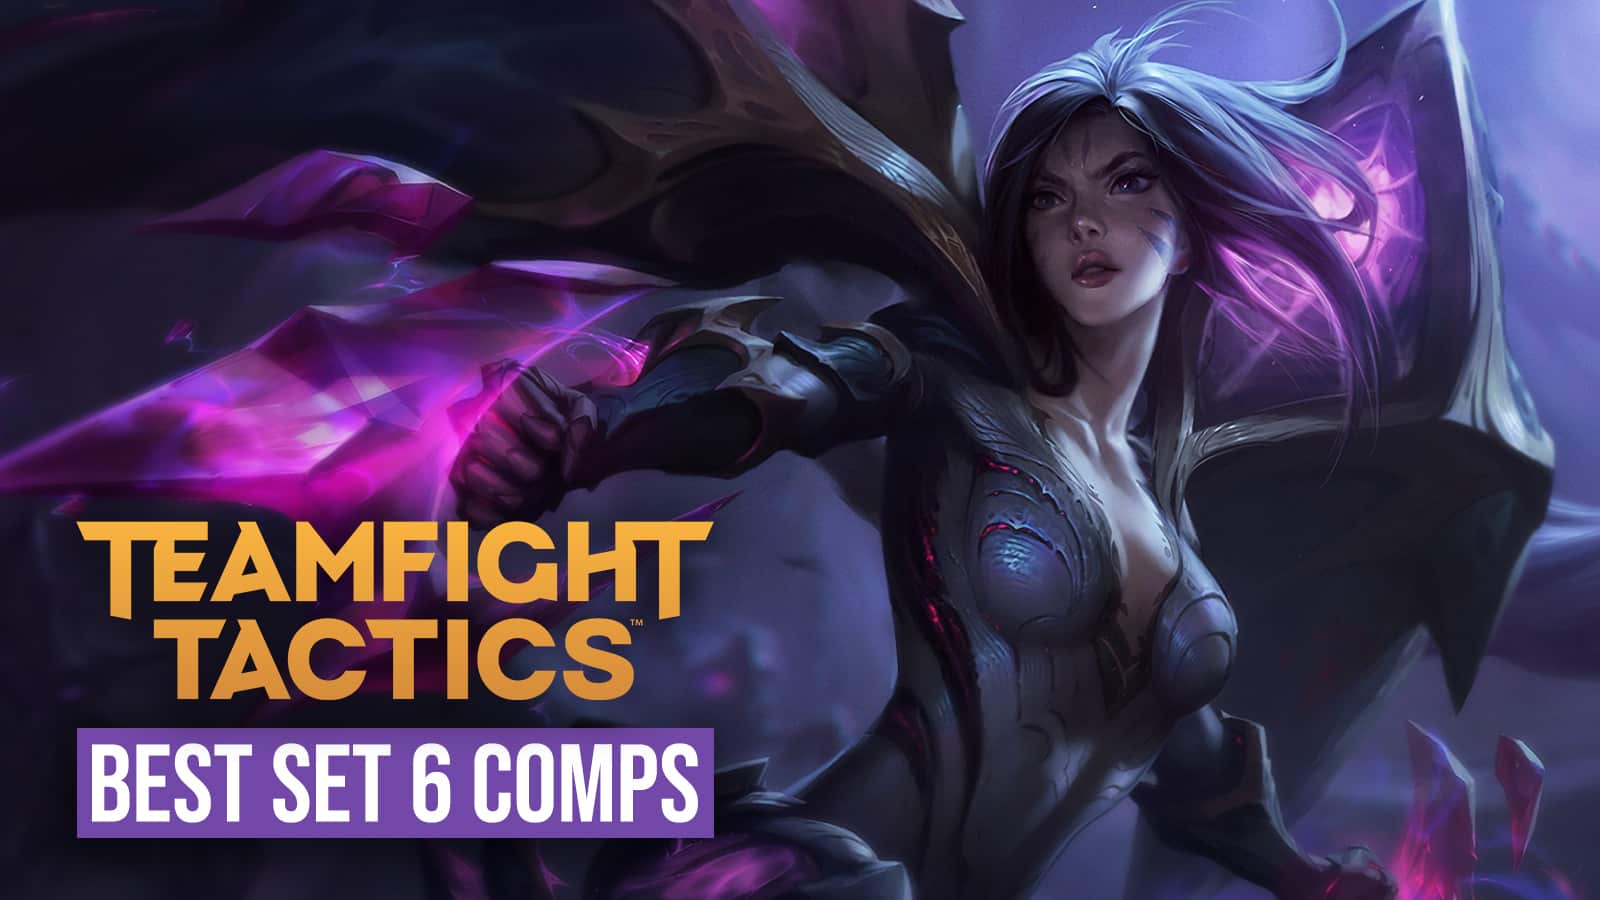 TFT Set 6.5 comps: The best comps in TFT 12.4 b patch